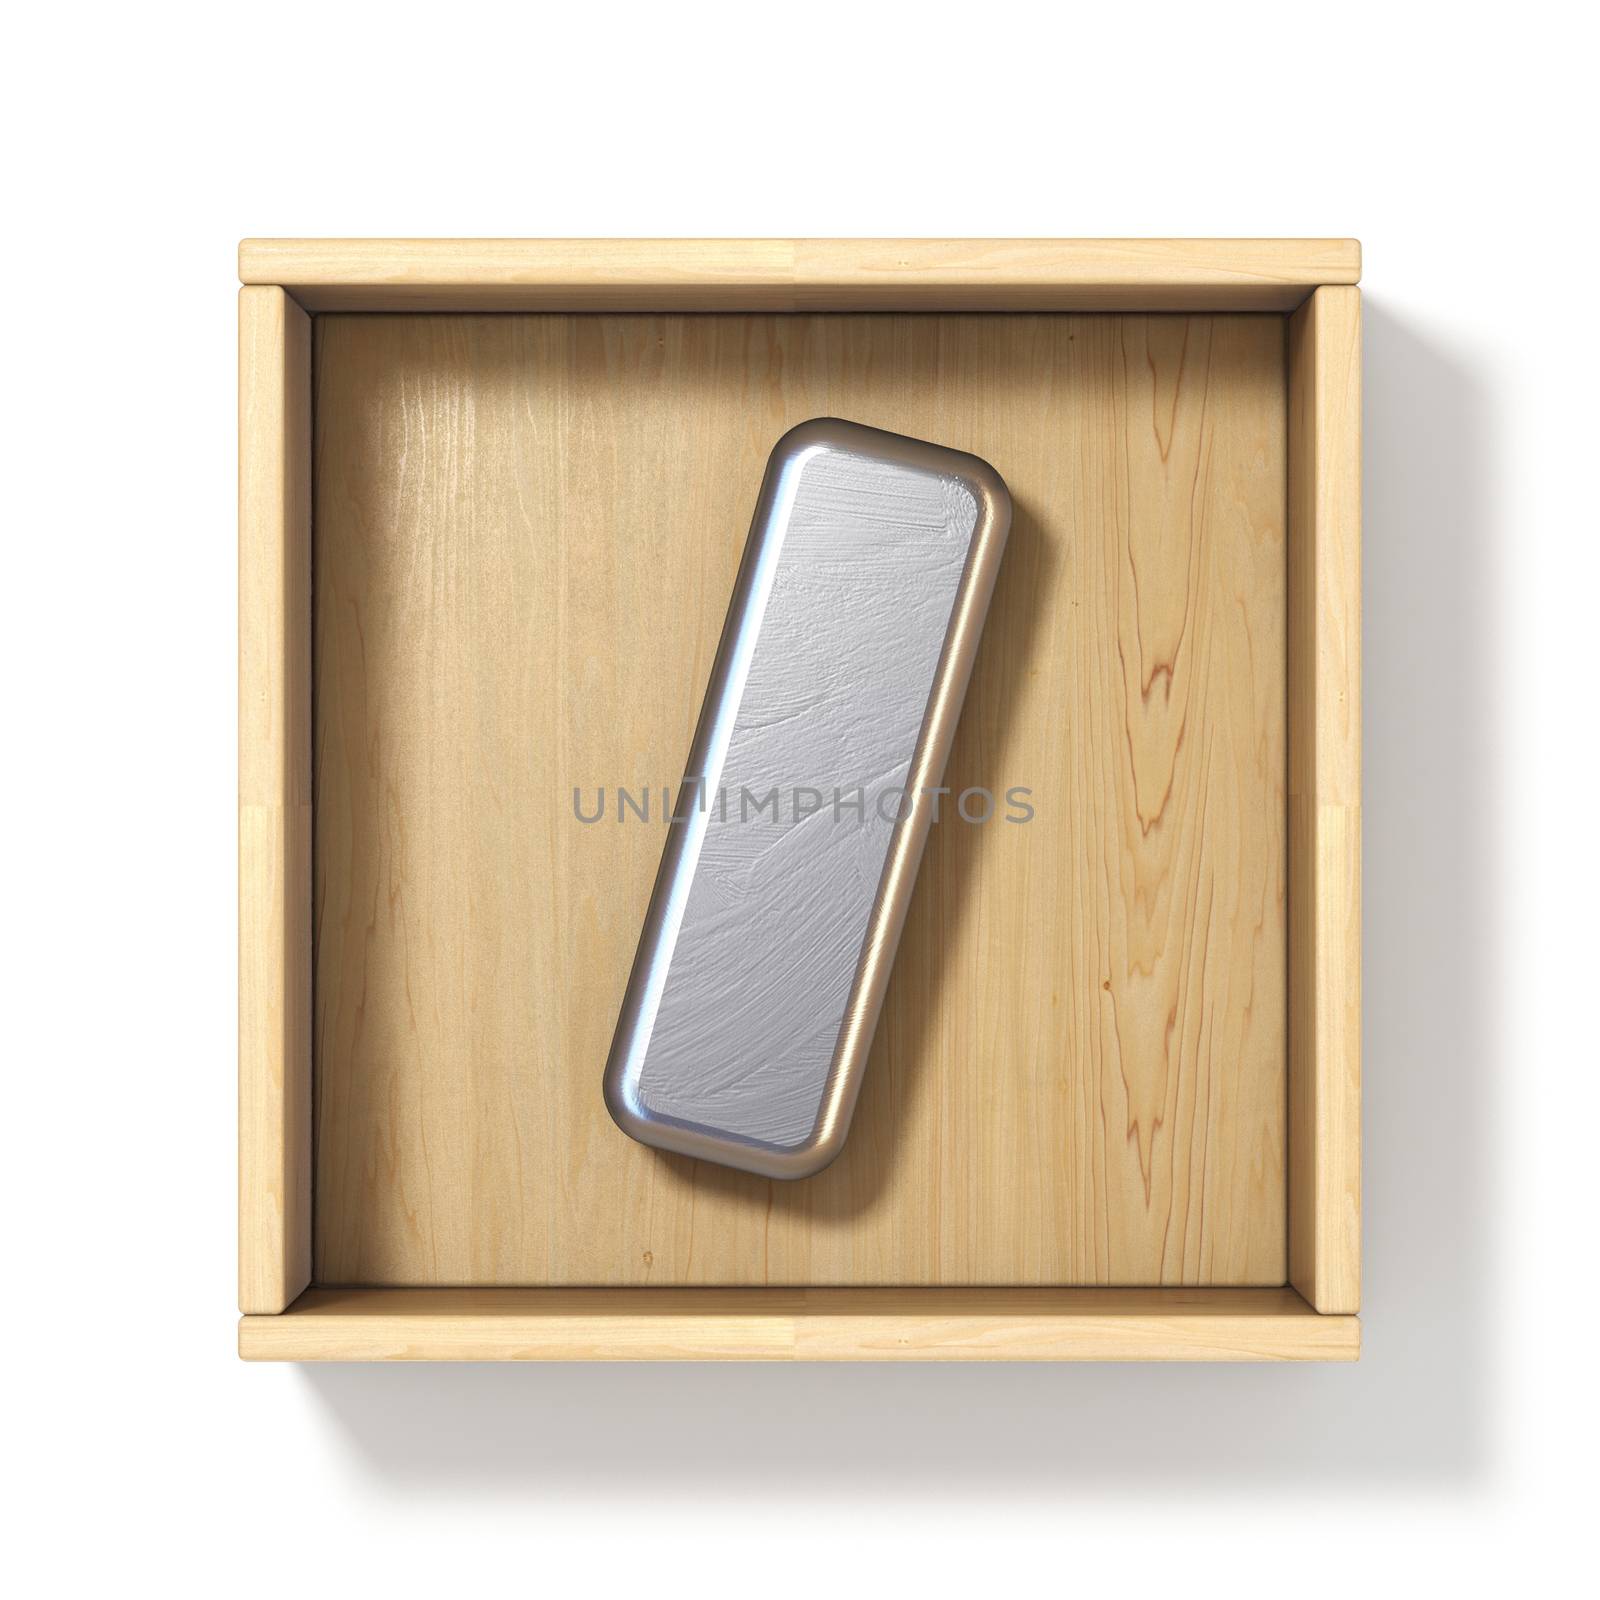 Silver metal letter I in wooden box 3D render illustration isolated on white background